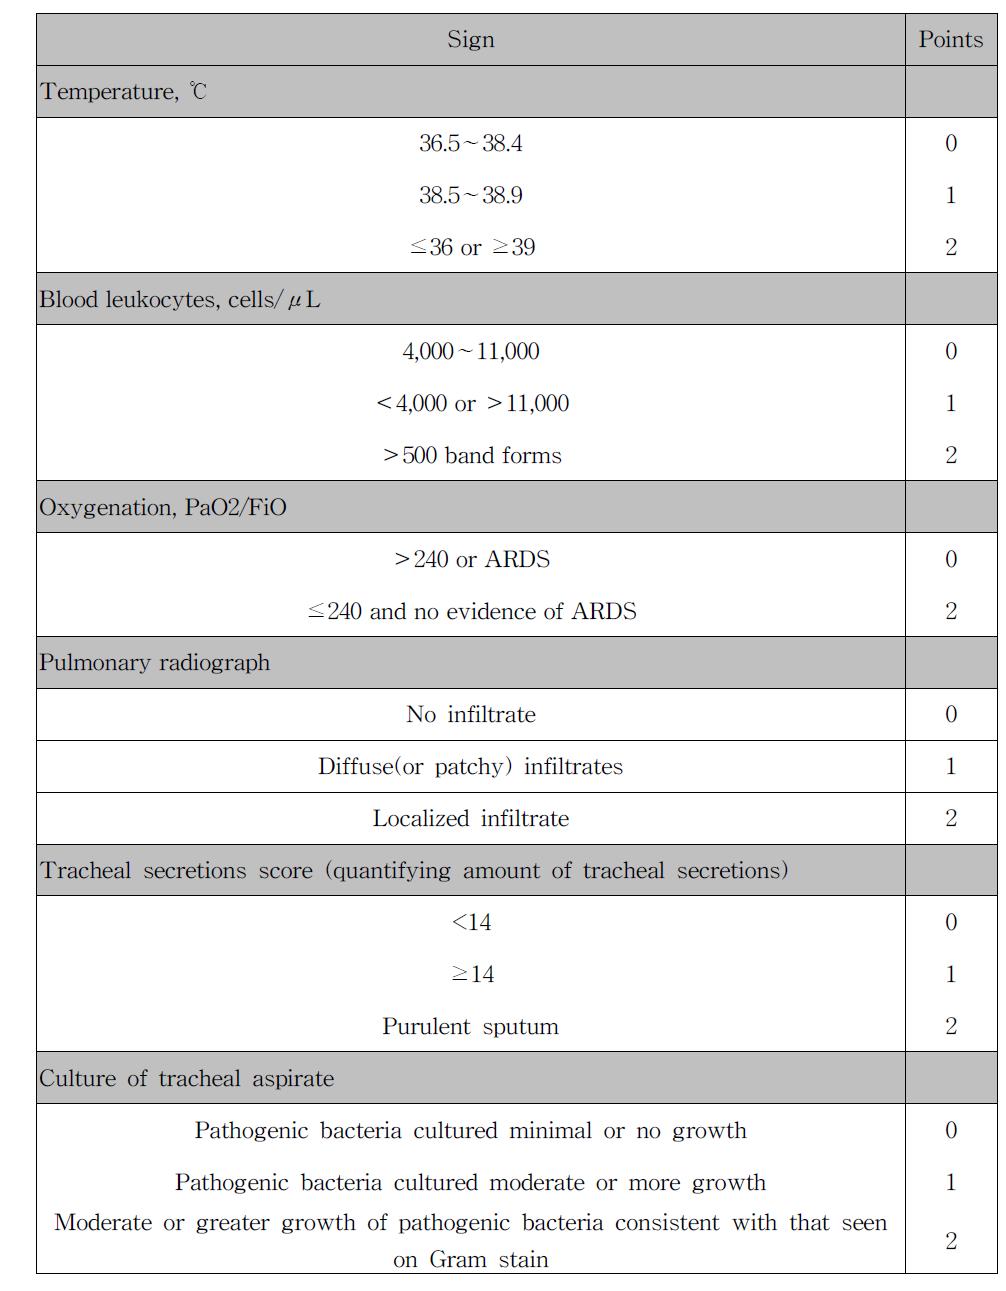 Clinical Pulmonary Infection Score(CPIS)